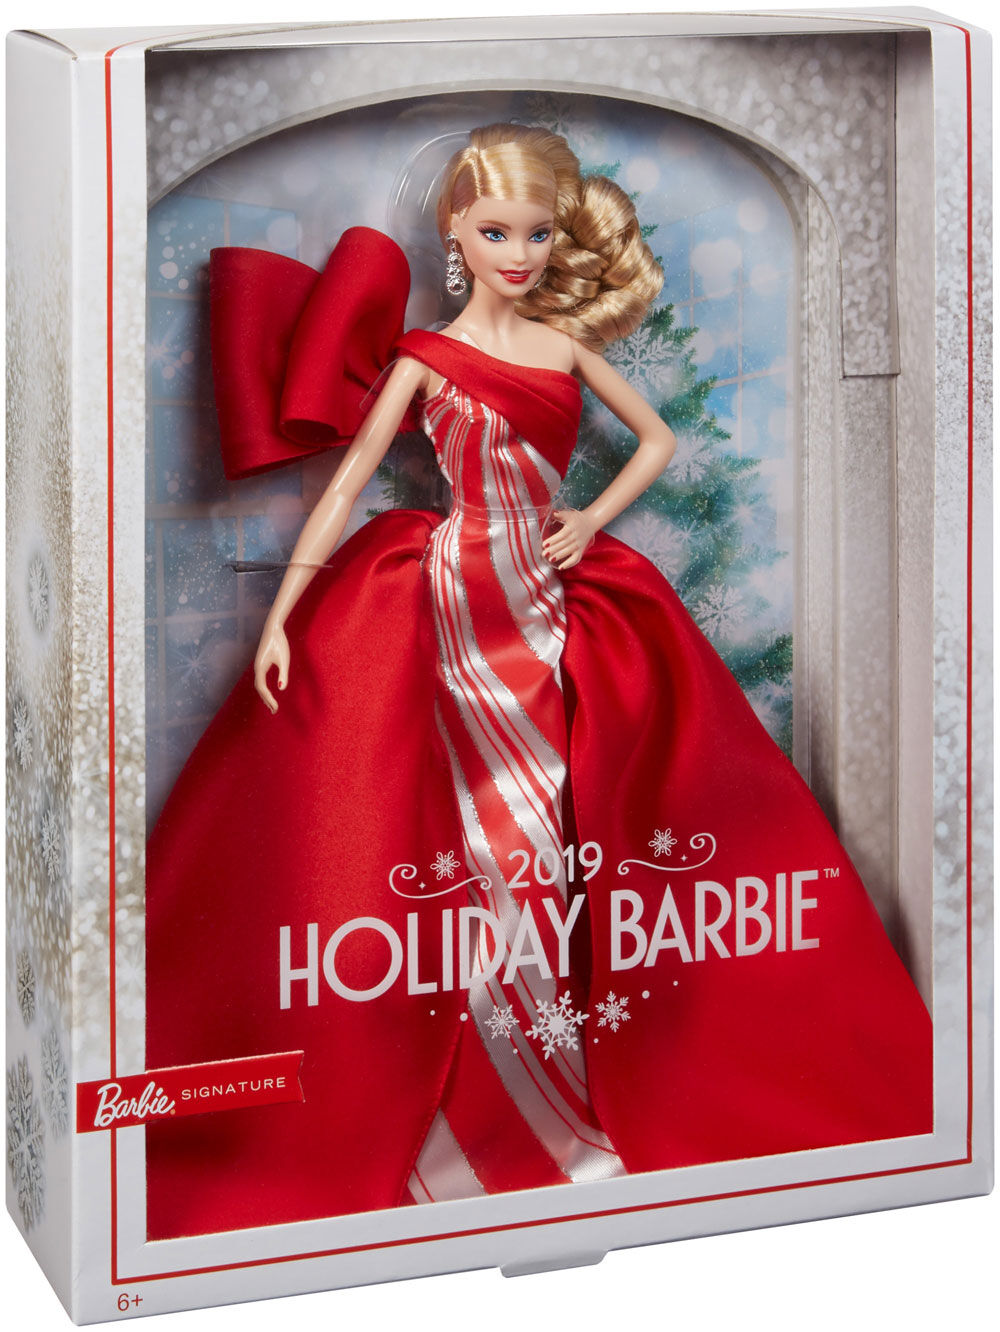 what year did the first holiday barbie come out